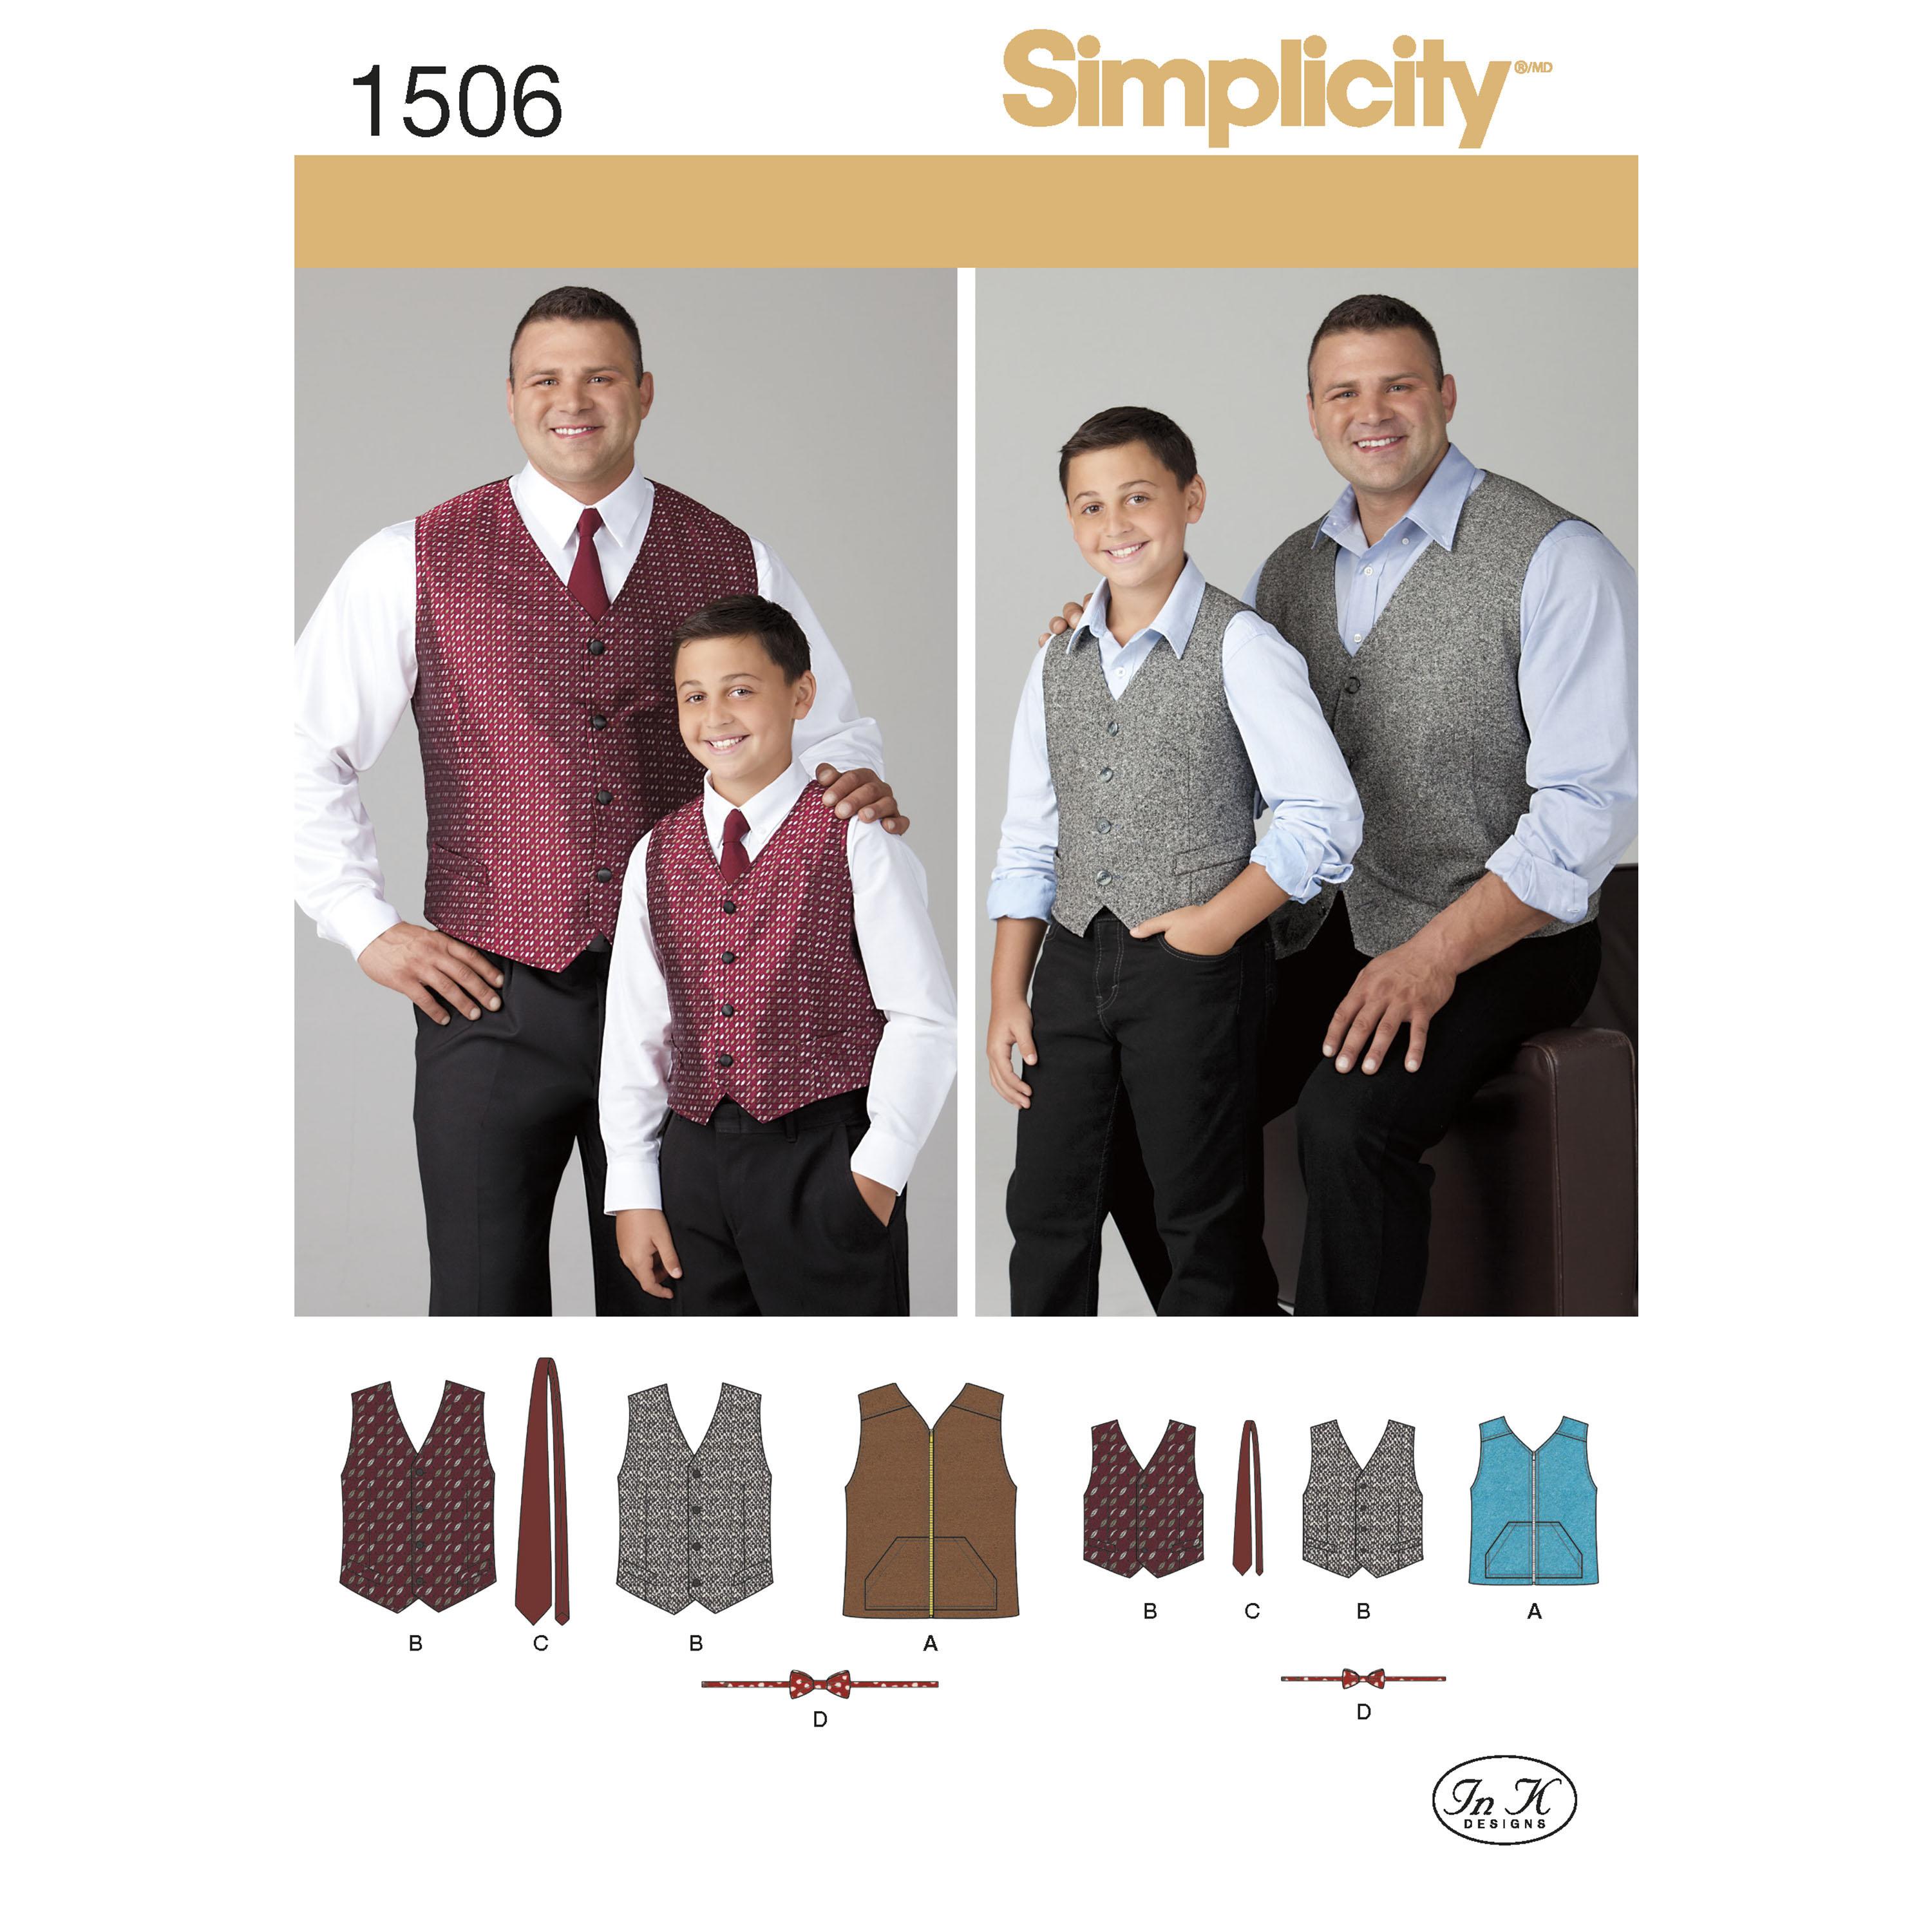 Simplicity S1506 Husky Boys' and Big and Tall Men's Vests